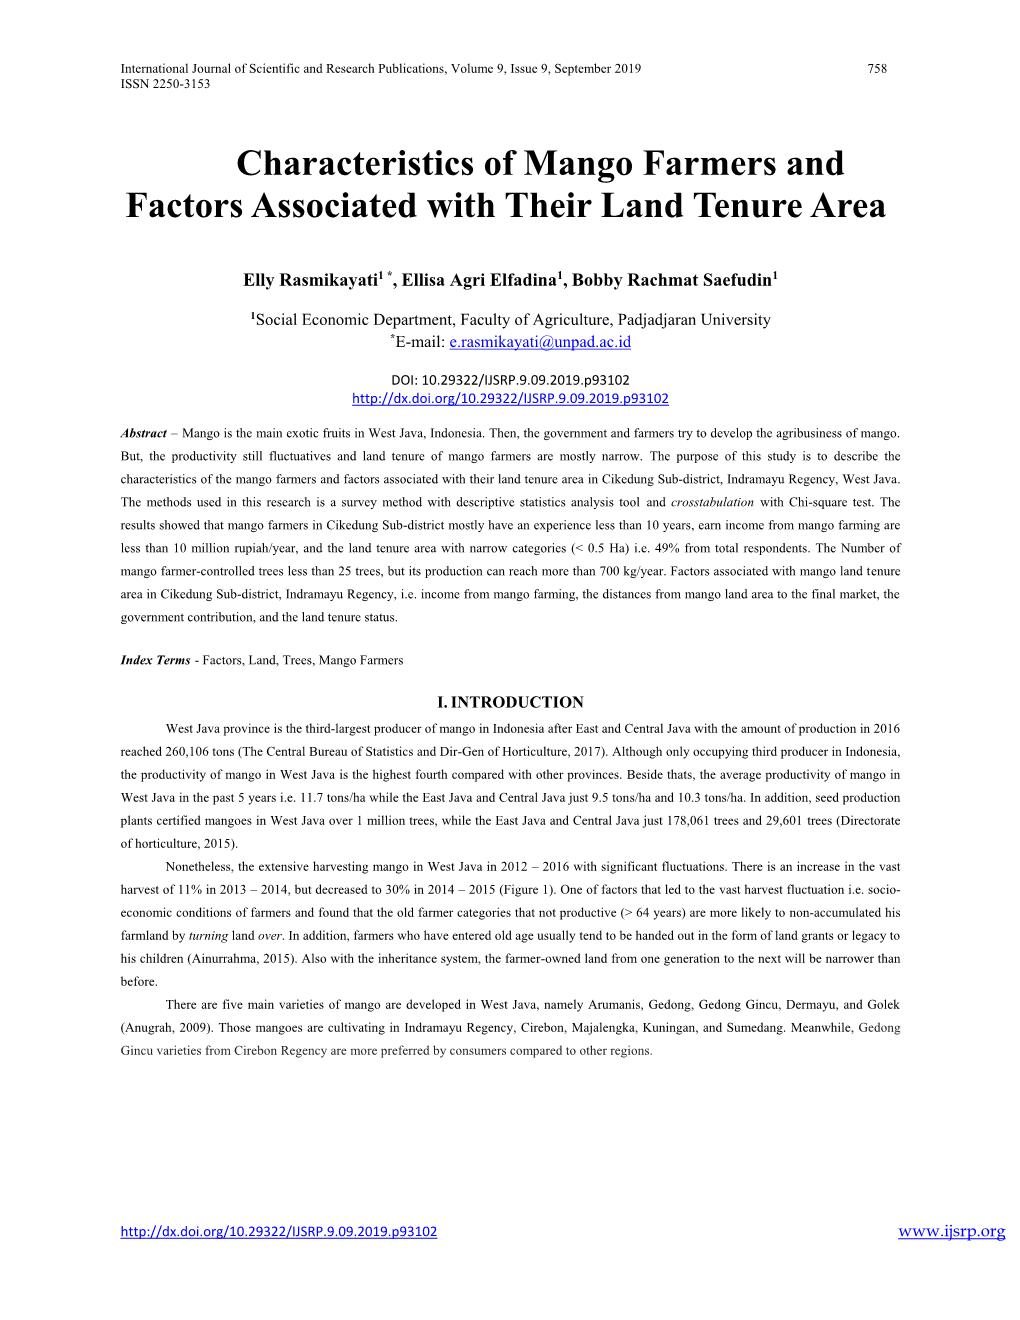 Characteristics of Mango Farmers and Factors Associated with Their Land Tenure Area